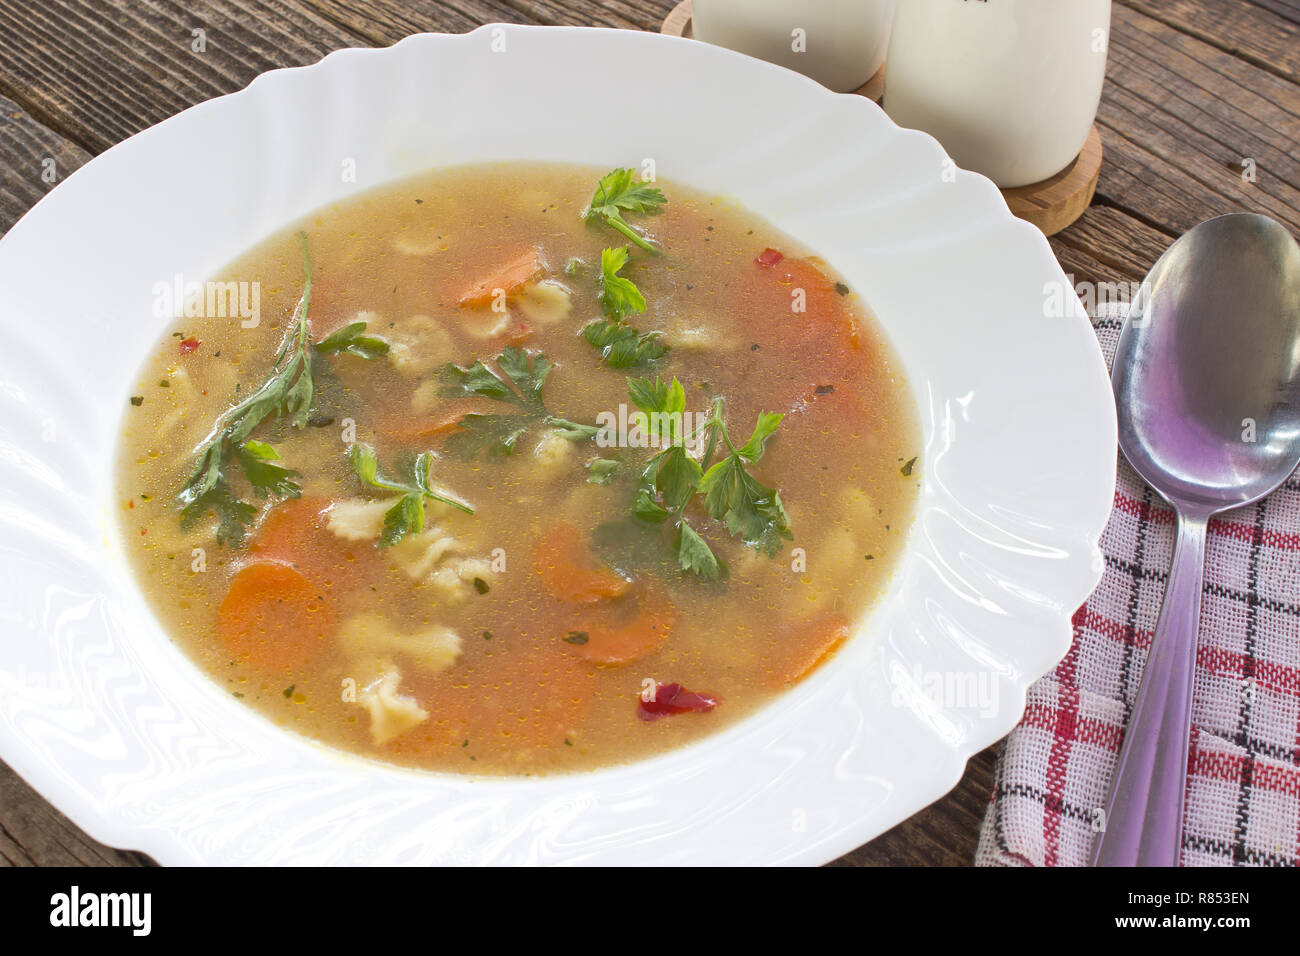 Soup with meatballs and pasta in plate on table Stock Photo